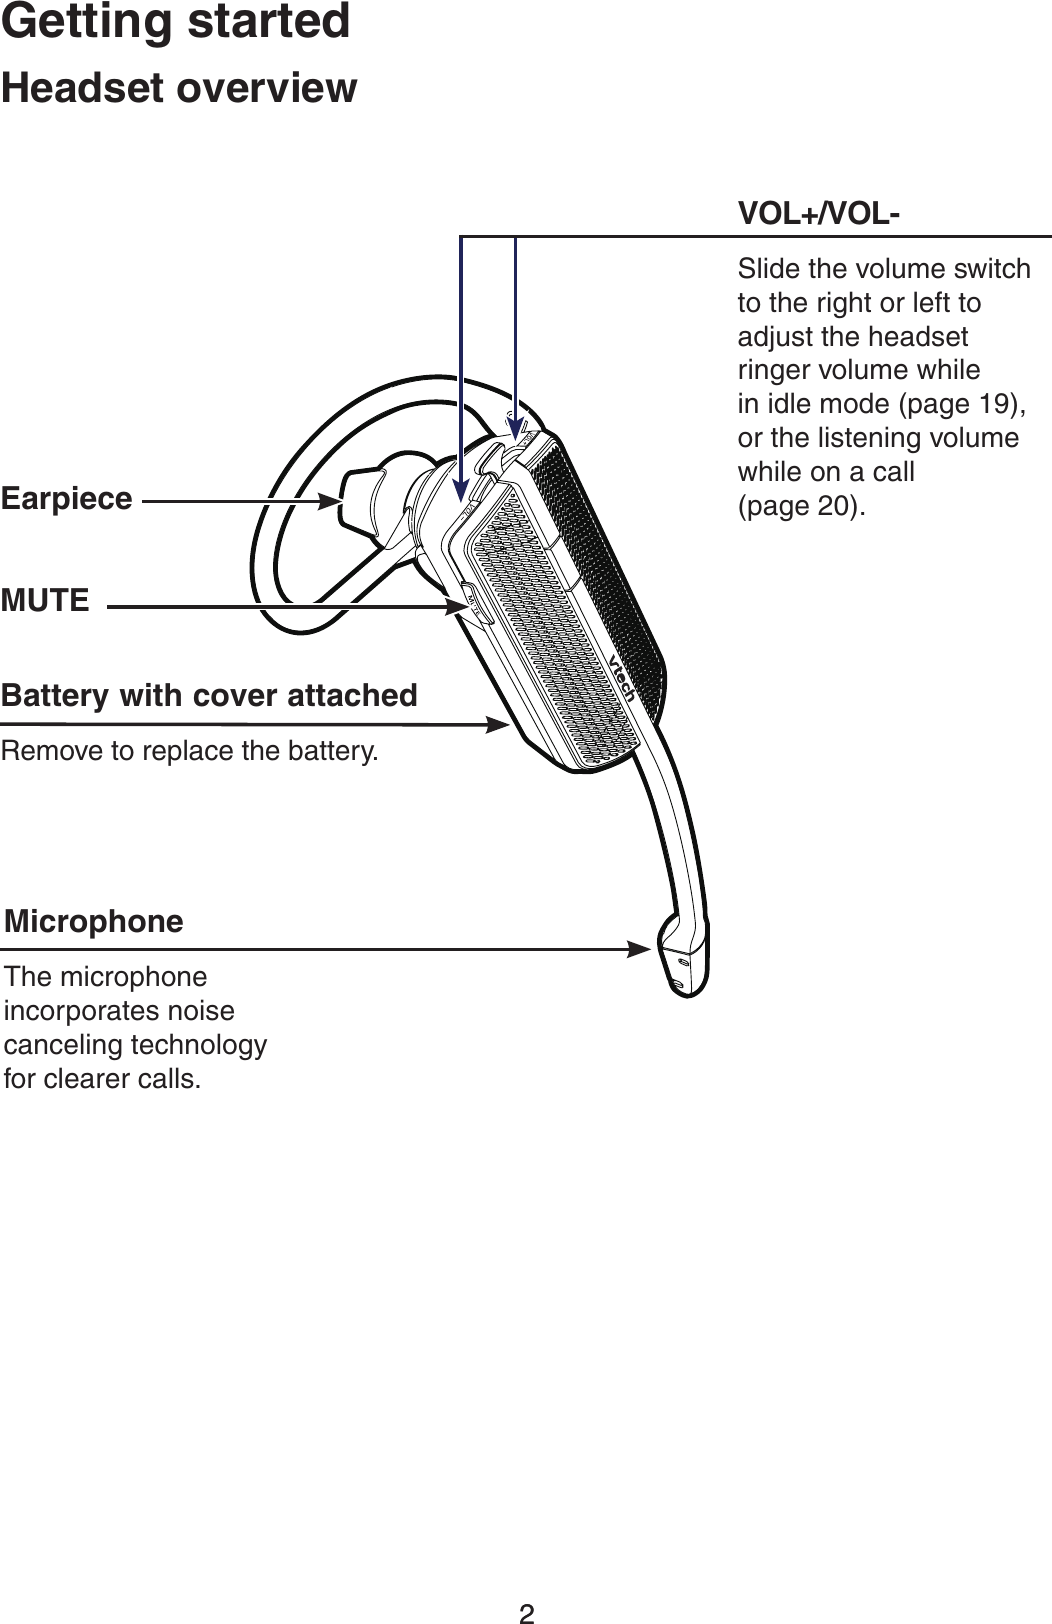 22(FUUJOHTUBSUFE)FBETFUPWFSWJFX&amp;BSQJFDF.JDSPQIPOFThe microphone incorporates noise canceling technology for clearer calls.#BUUFSZXJUIDPWFSBUUBDIFERemove to replace the battery..65&amp;70-70-Slide the volume switch to the right or left to adjust the headset ringer volume while  in idle mode (page 19), or the listening volume while on a call  (page 20).